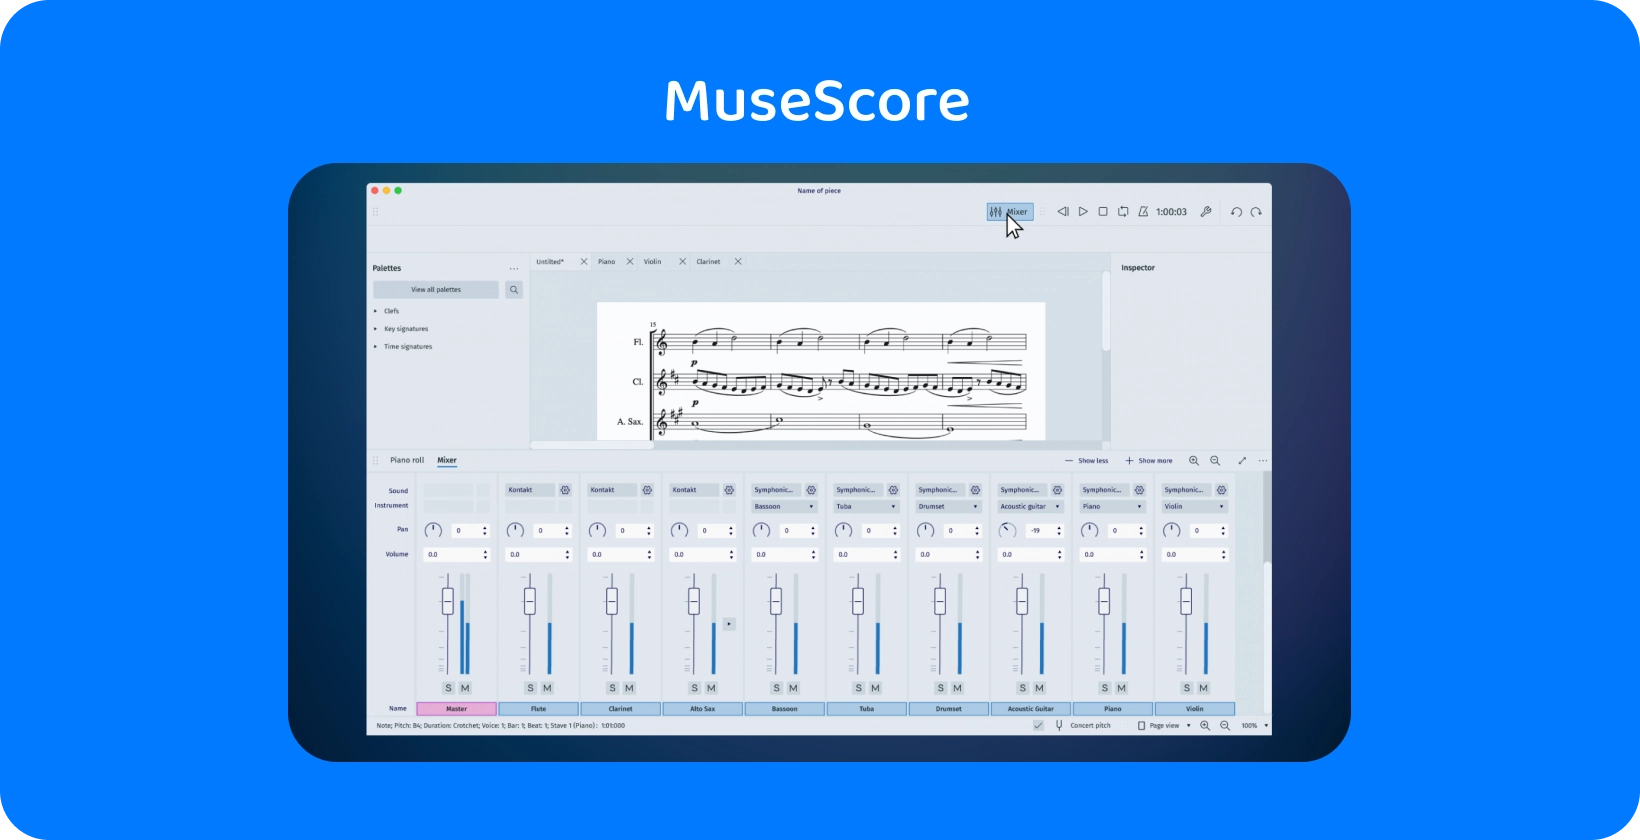 MuseScore interface showcasing the mixer tool for audio transcription, essential for music creators.